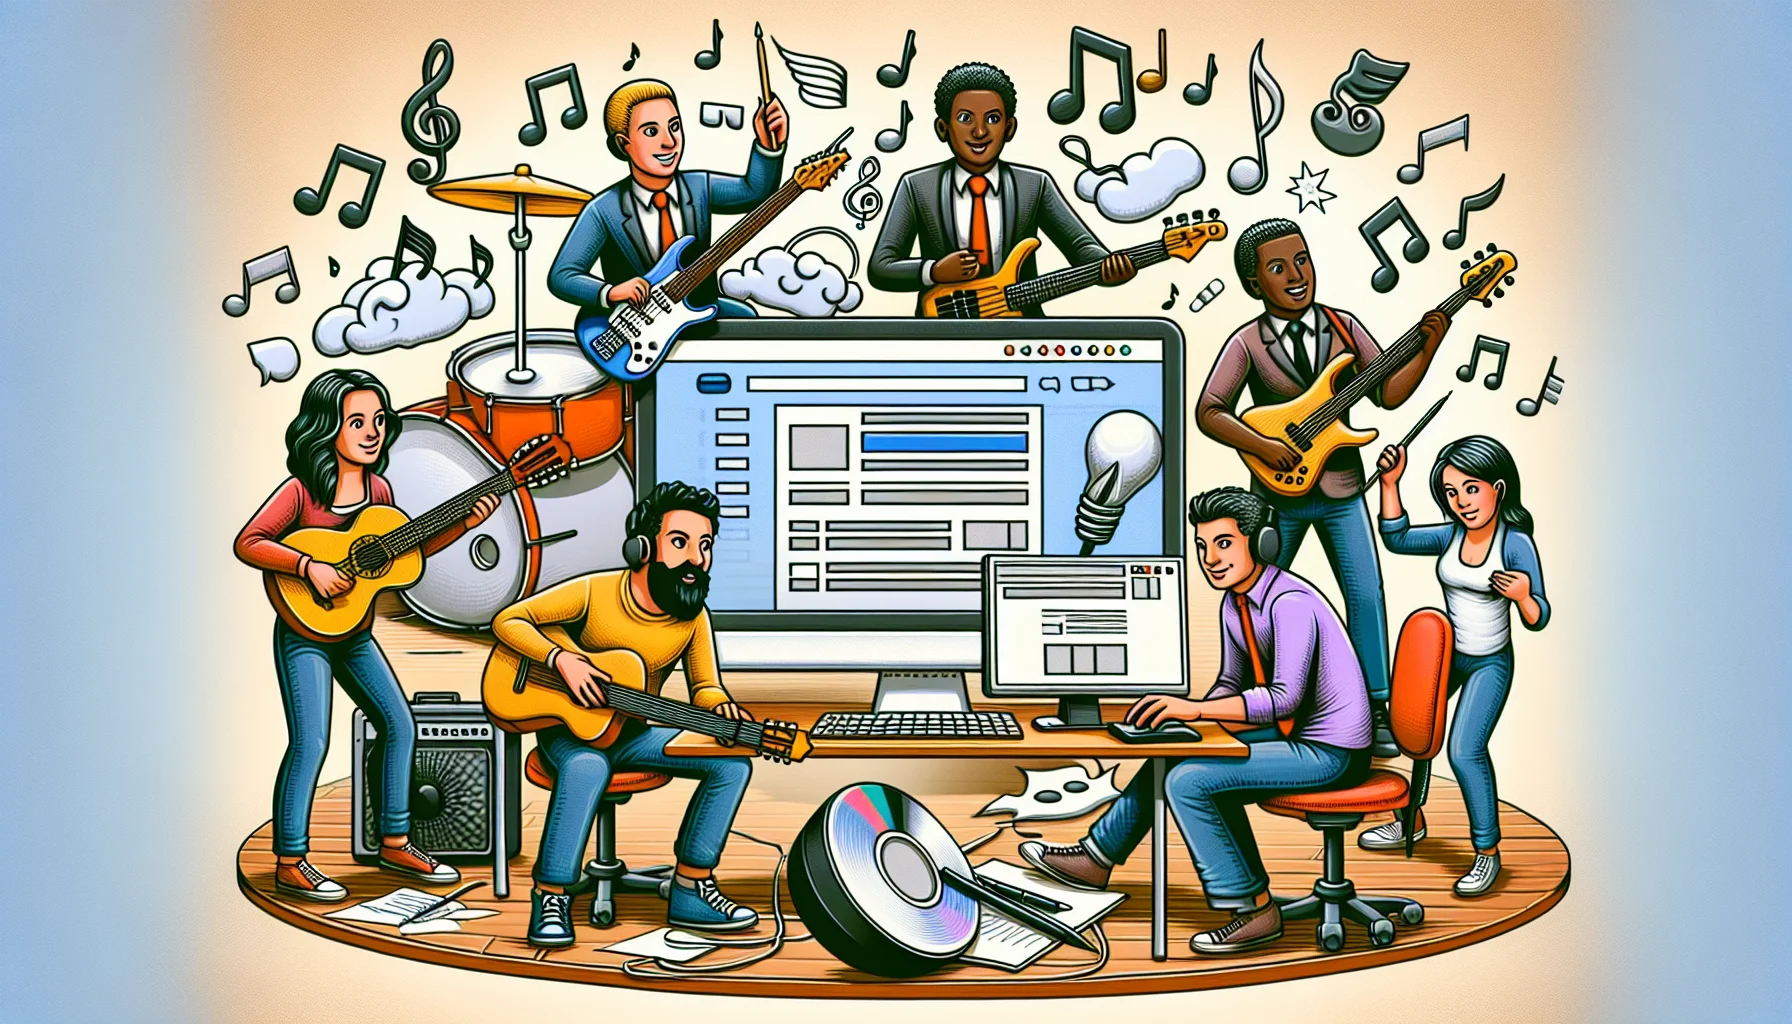 Create an image of a lively, humorous scene situated in an office setting where a band of four, diverse individuals, each from a different descent (Caucasian, Middle-Eastern, Asian, Black) are building a website together. Depict them with various musical instruments around them - a guitar, a pair of drum sticks, a keyboard, and a saxophone. The aesthetic should mimic lighthearted comedy, with elements such as a web hosting logo shaped like a musical note floating comically over them, a mouse cursor that looks like a guitar pick, and musical notes sprinkled around the website design they are creating.